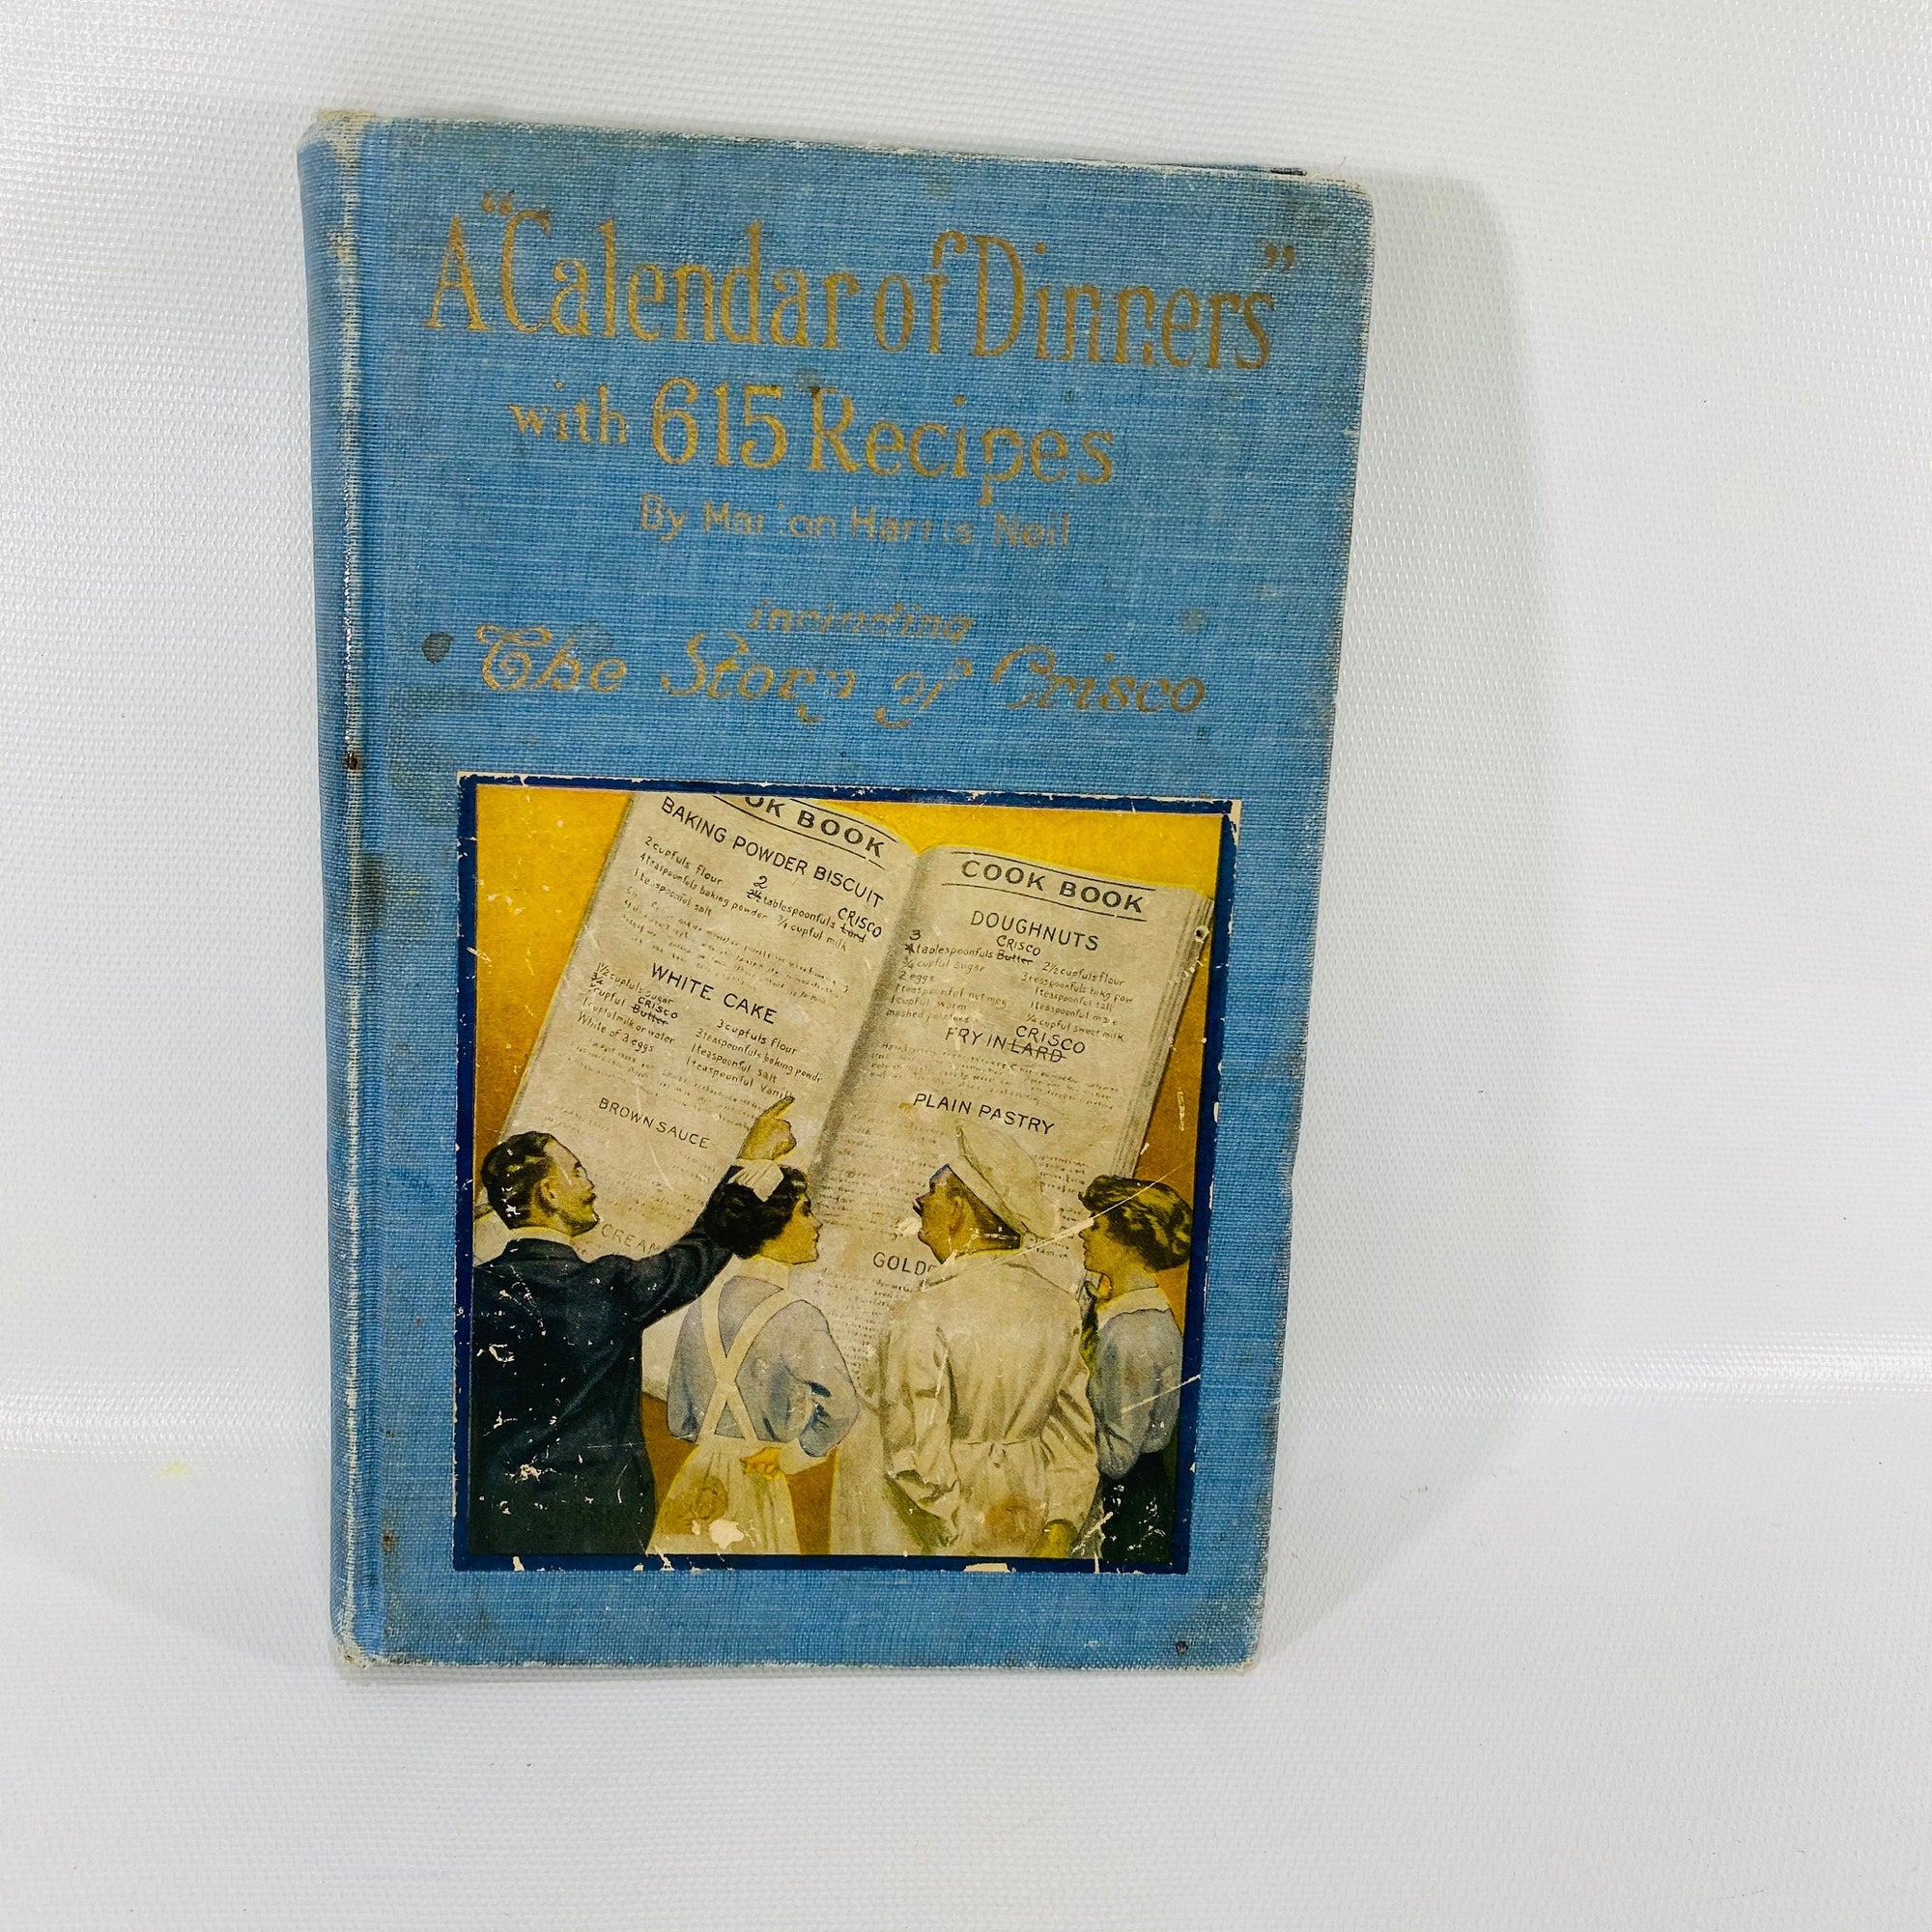 A Calendar of Dinners including The Story of Crisco by Marion Neil 1917 The Proctor & Gamble Co. Vintage Book